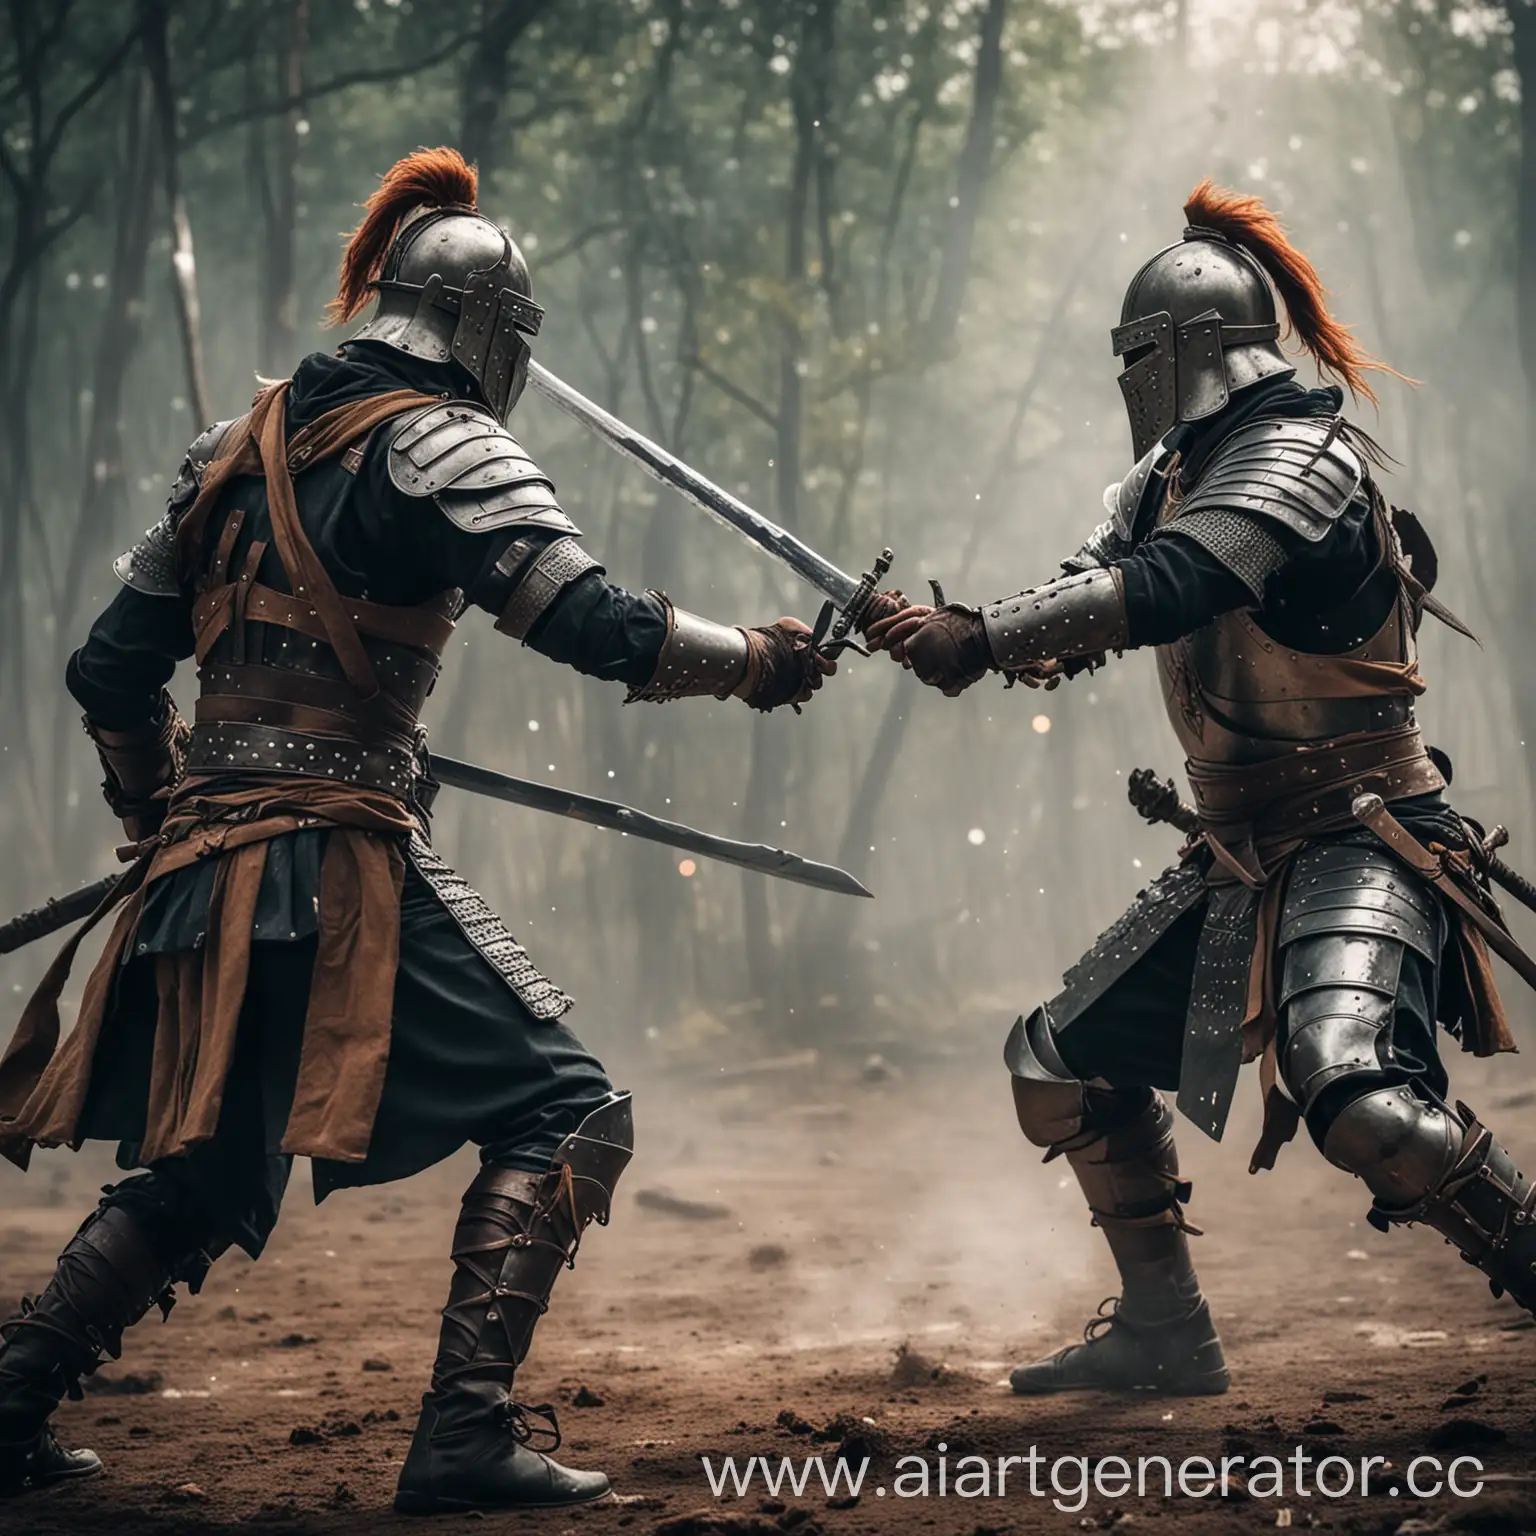 Two warriors in plate armor are fighting with swords